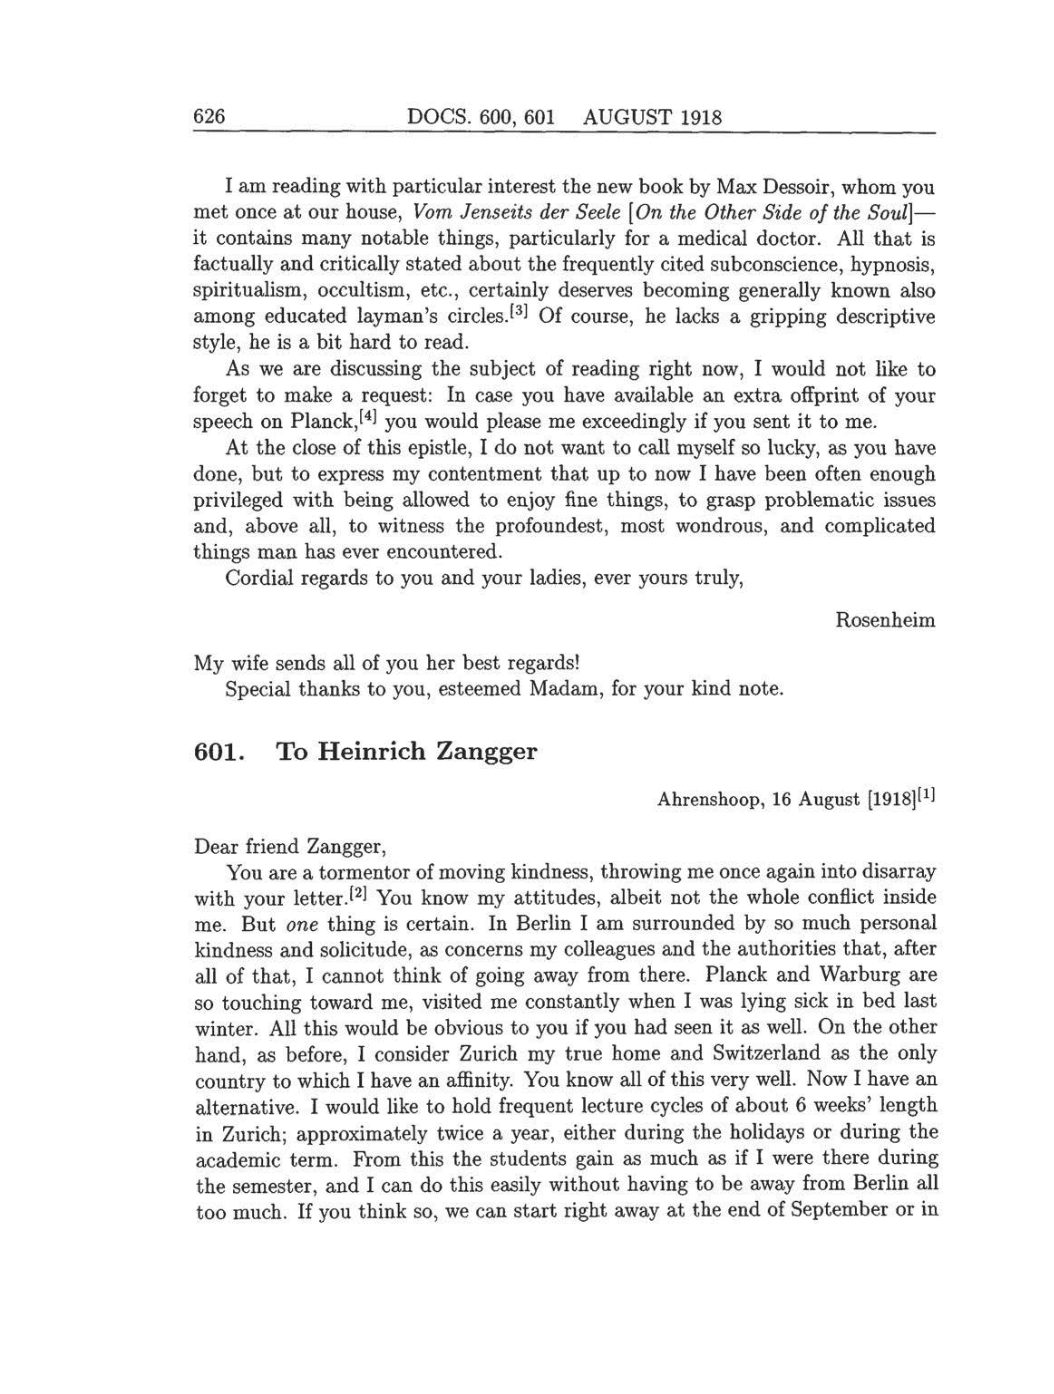 Volume 8: The Berlin Years: Correspondence, 1914-1918 (English translation supplement) page 626